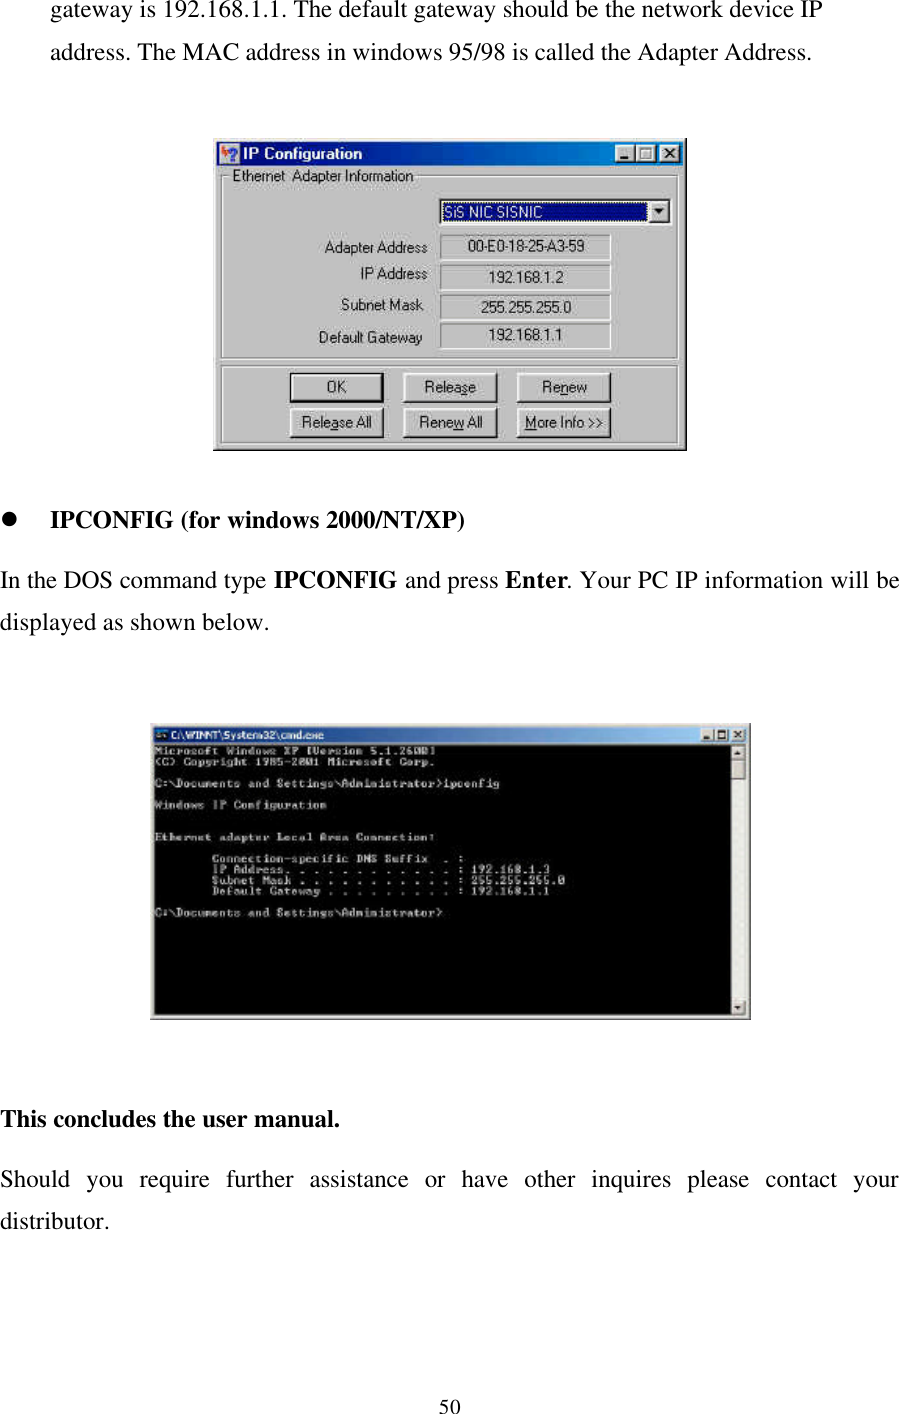 50gateway is 192.168.1.1. The default gateway should be the network device IPaddress. The MAC address in windows 95/98 is called the Adapter Address.l IPCONFIG (for windows 2000/NT/XP)In the DOS command type IPCONFIG and press Enter. Your PC IP information will bedisplayed as shown below.This concludes the user manual.Should you require further assistance or have other inquires please contact yourdistributor.